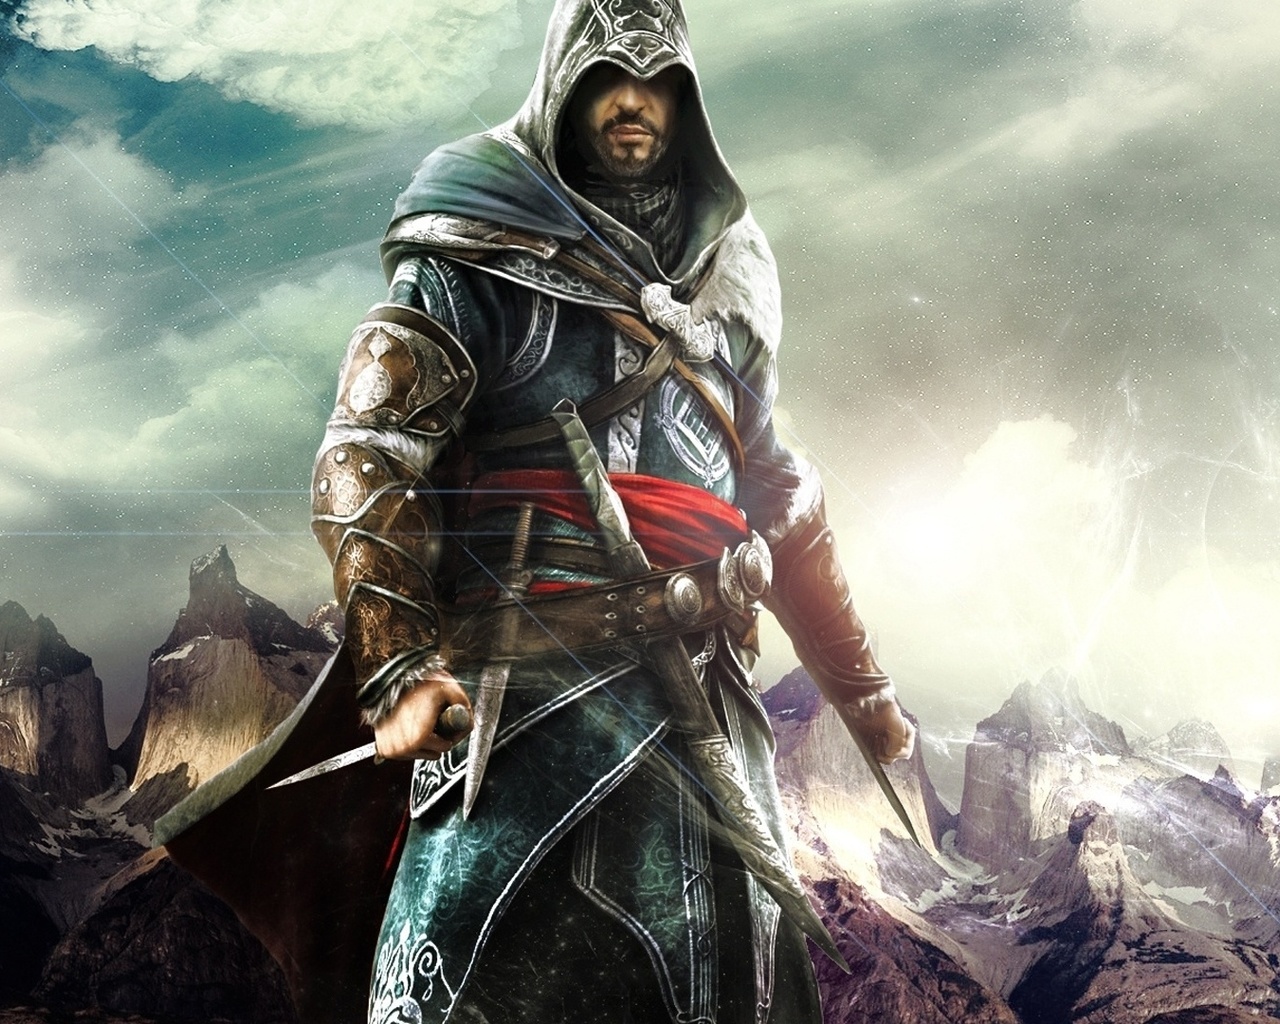 , assassin creed, game, 